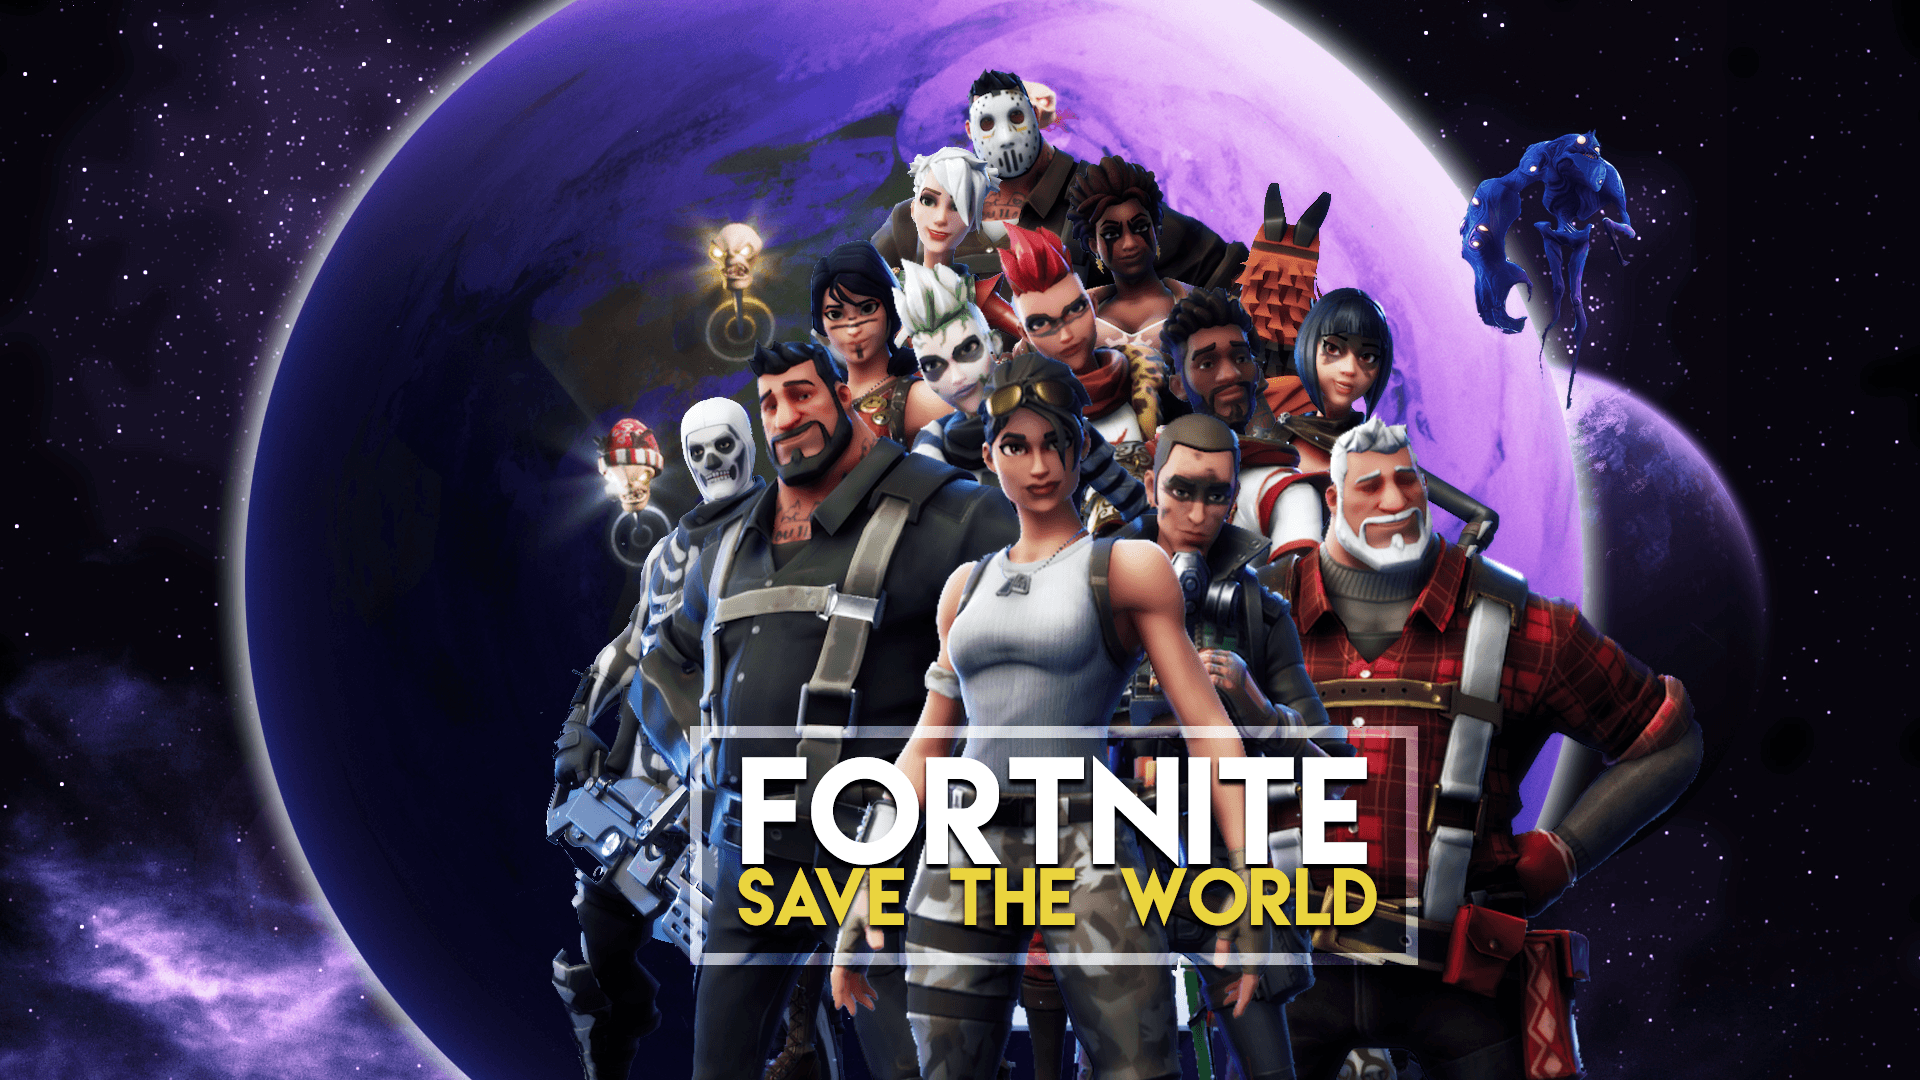 Made a new wallpaper, what do you guys think? : FORTnITE